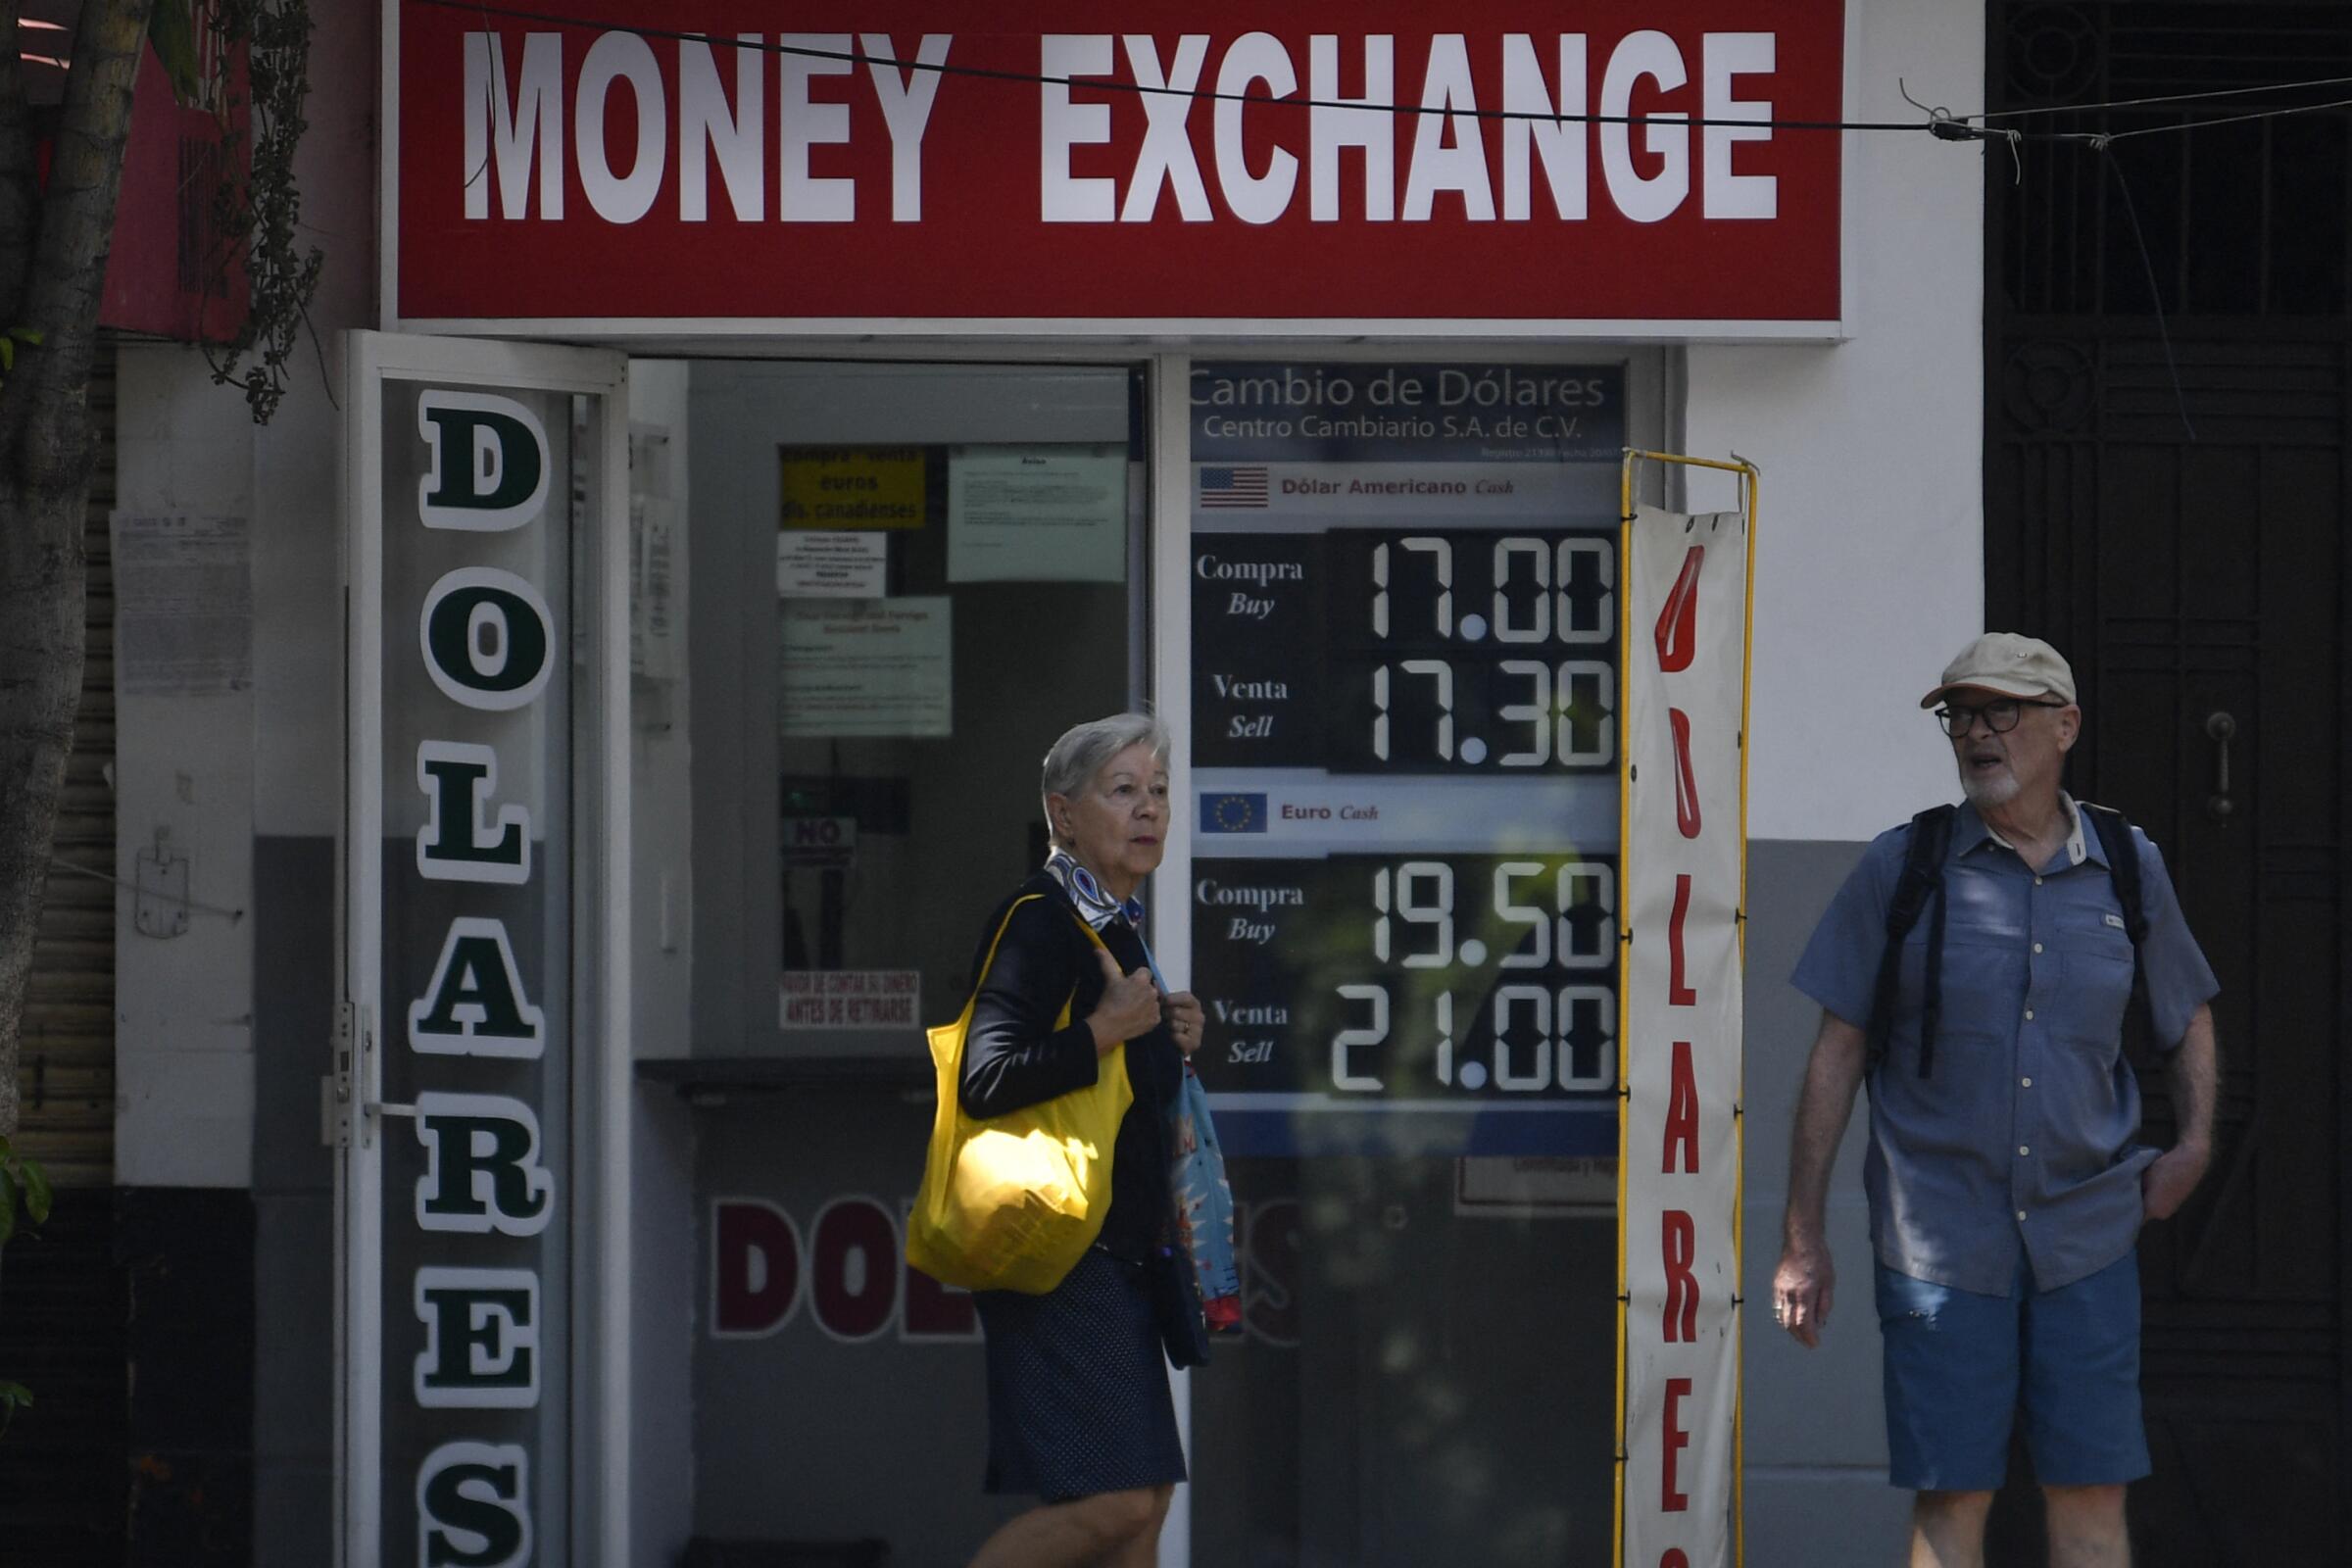 A woman walks past a money exchange in Mexico City